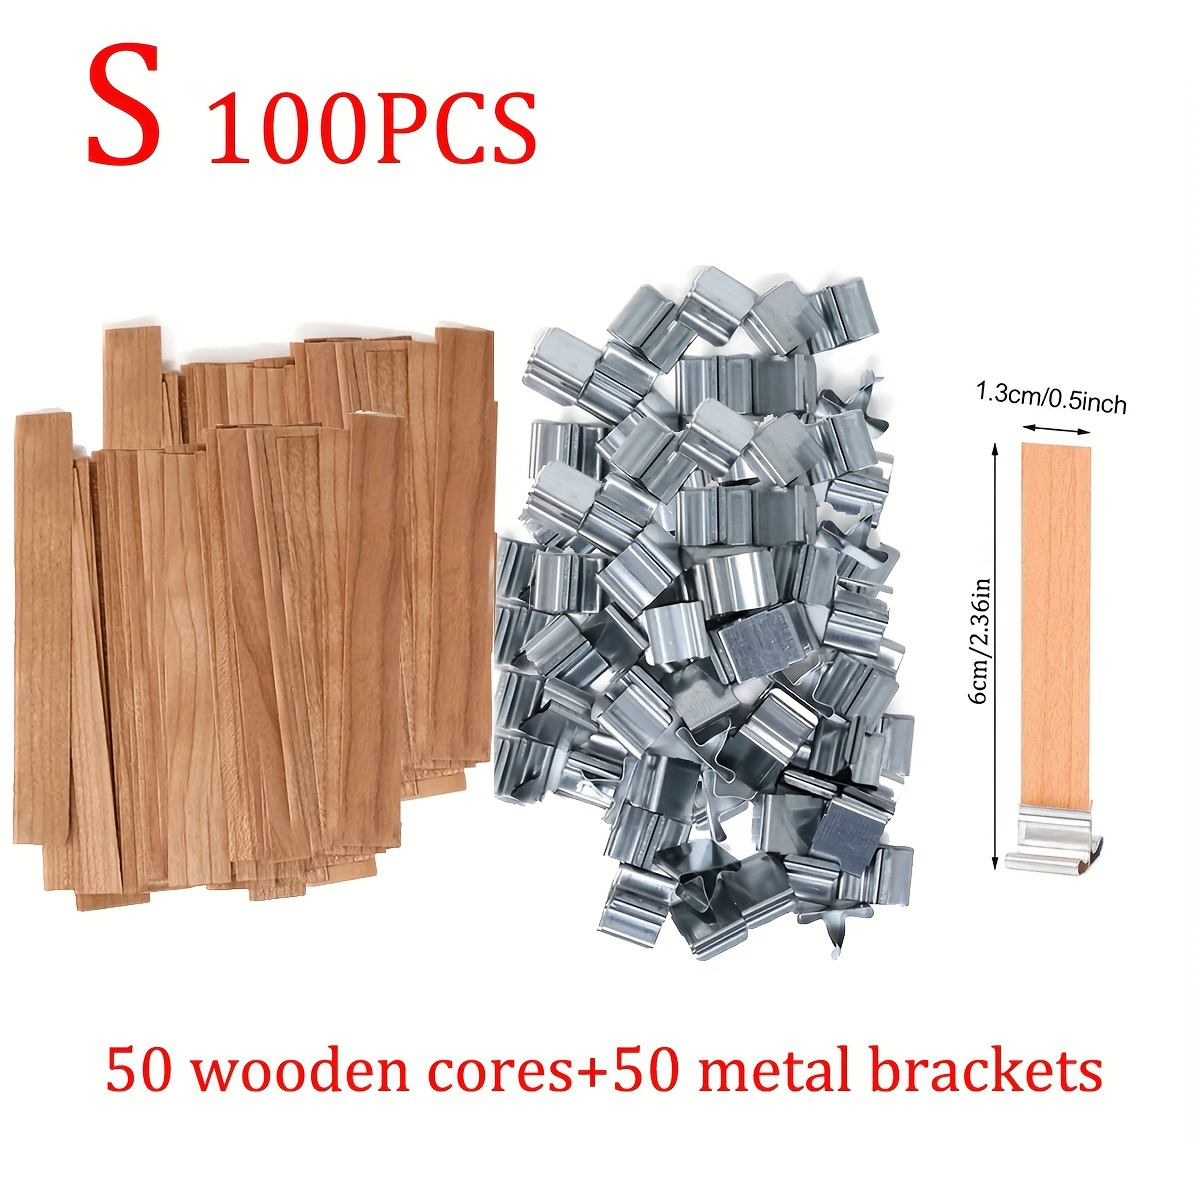 70pcs/Set Wooden Candle Wicks, Candle Making Wicks 5.1 X 0.5 Inch Naturally  Cherry Wood Wooden Candle Wicks Candle Cores With Iron Stand For DIY Candle  Making With Base, Candle Warning Stickers, Base